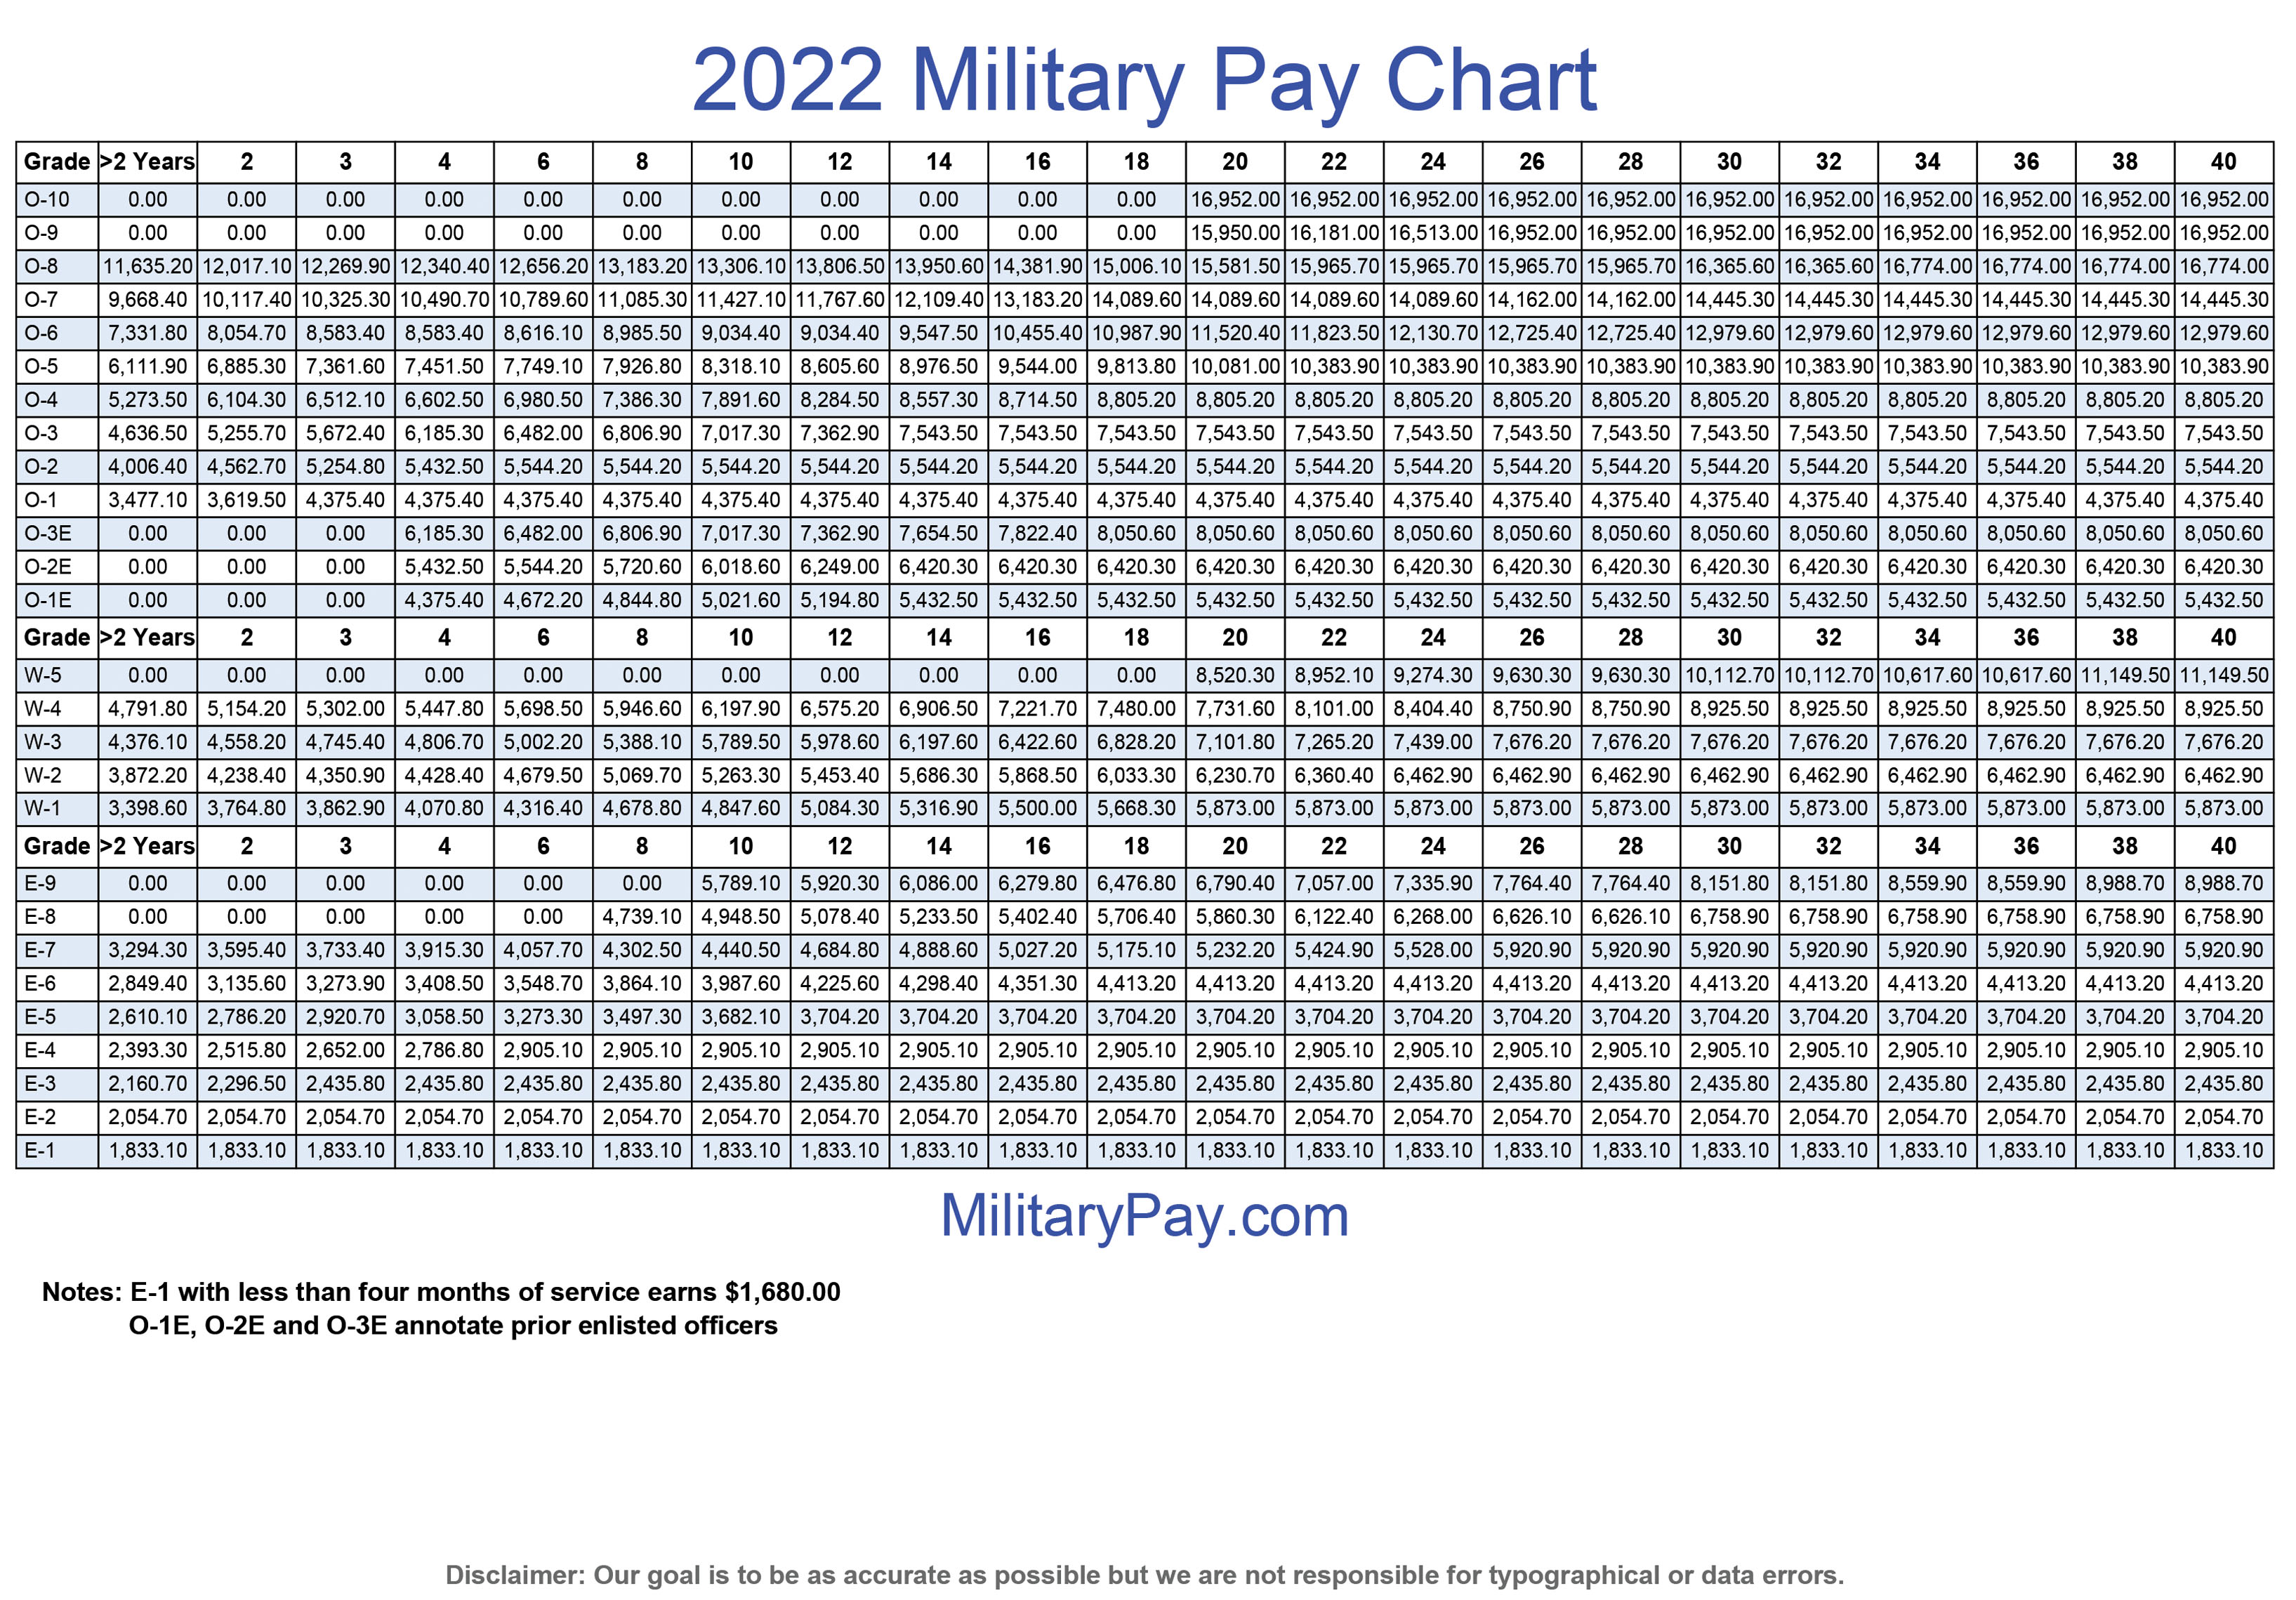 dod-mil-pay-charts